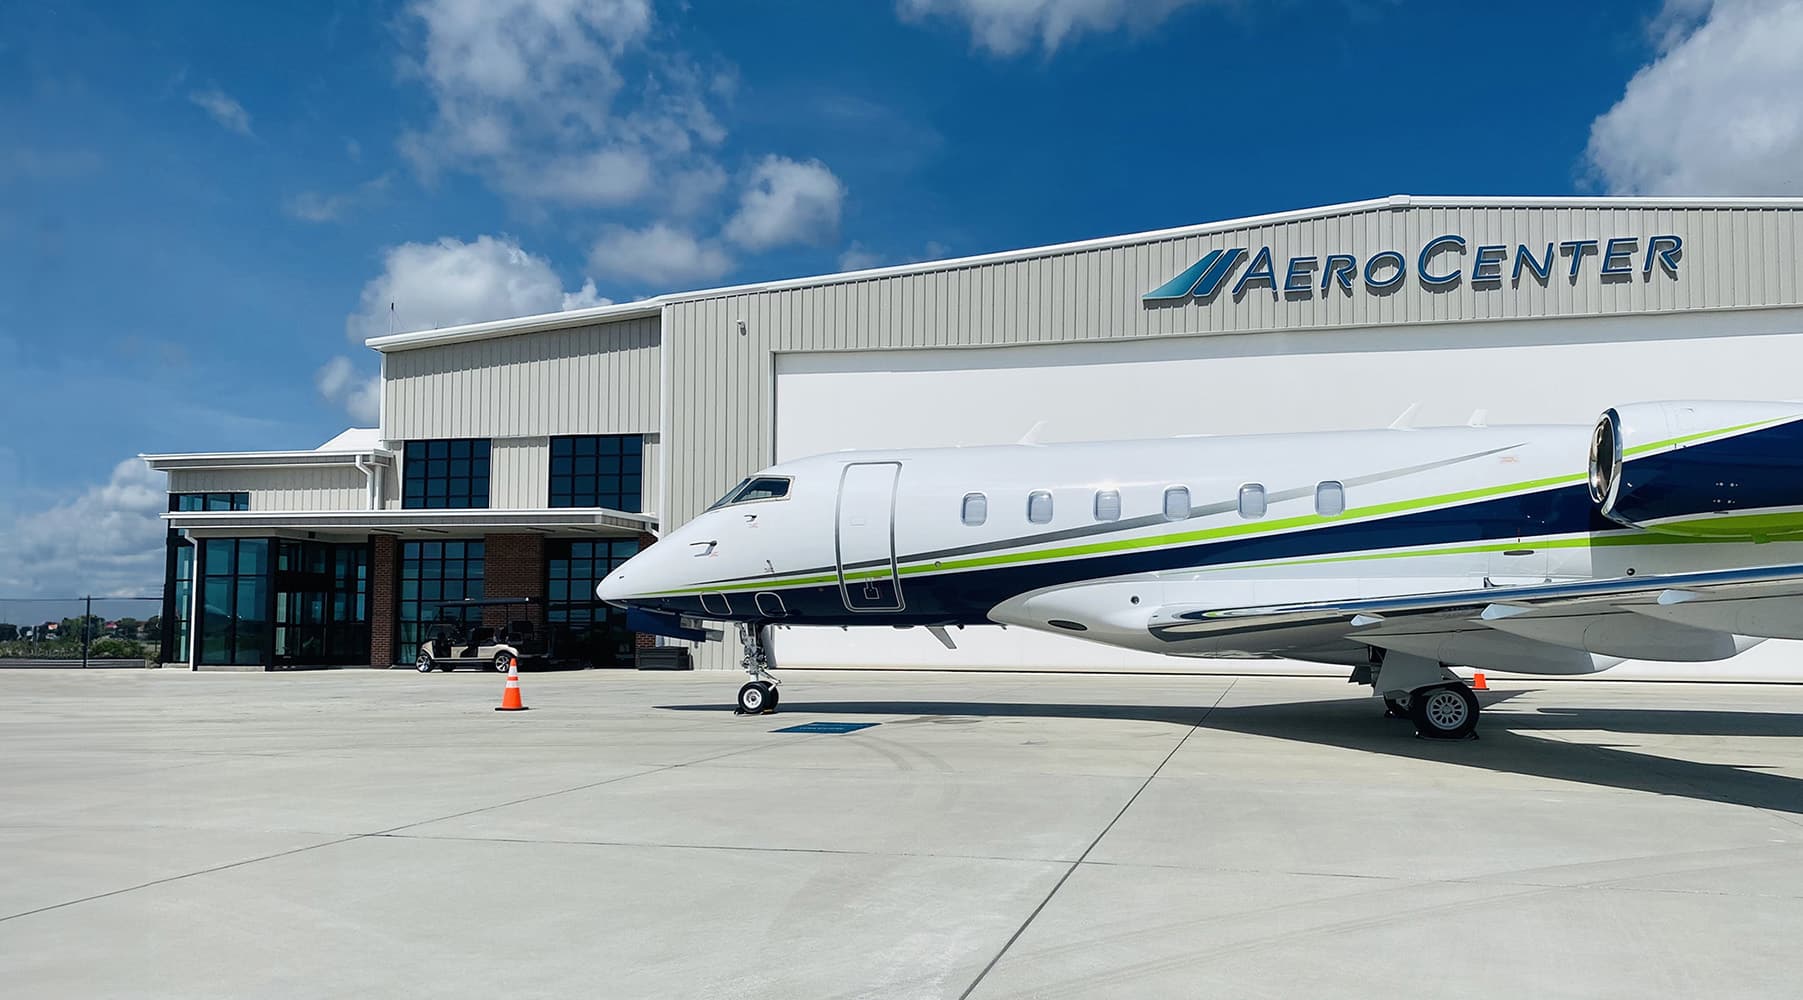 Exterior of Aero Center LAL with a Private Jet in parked on the ramp in front of the hangar